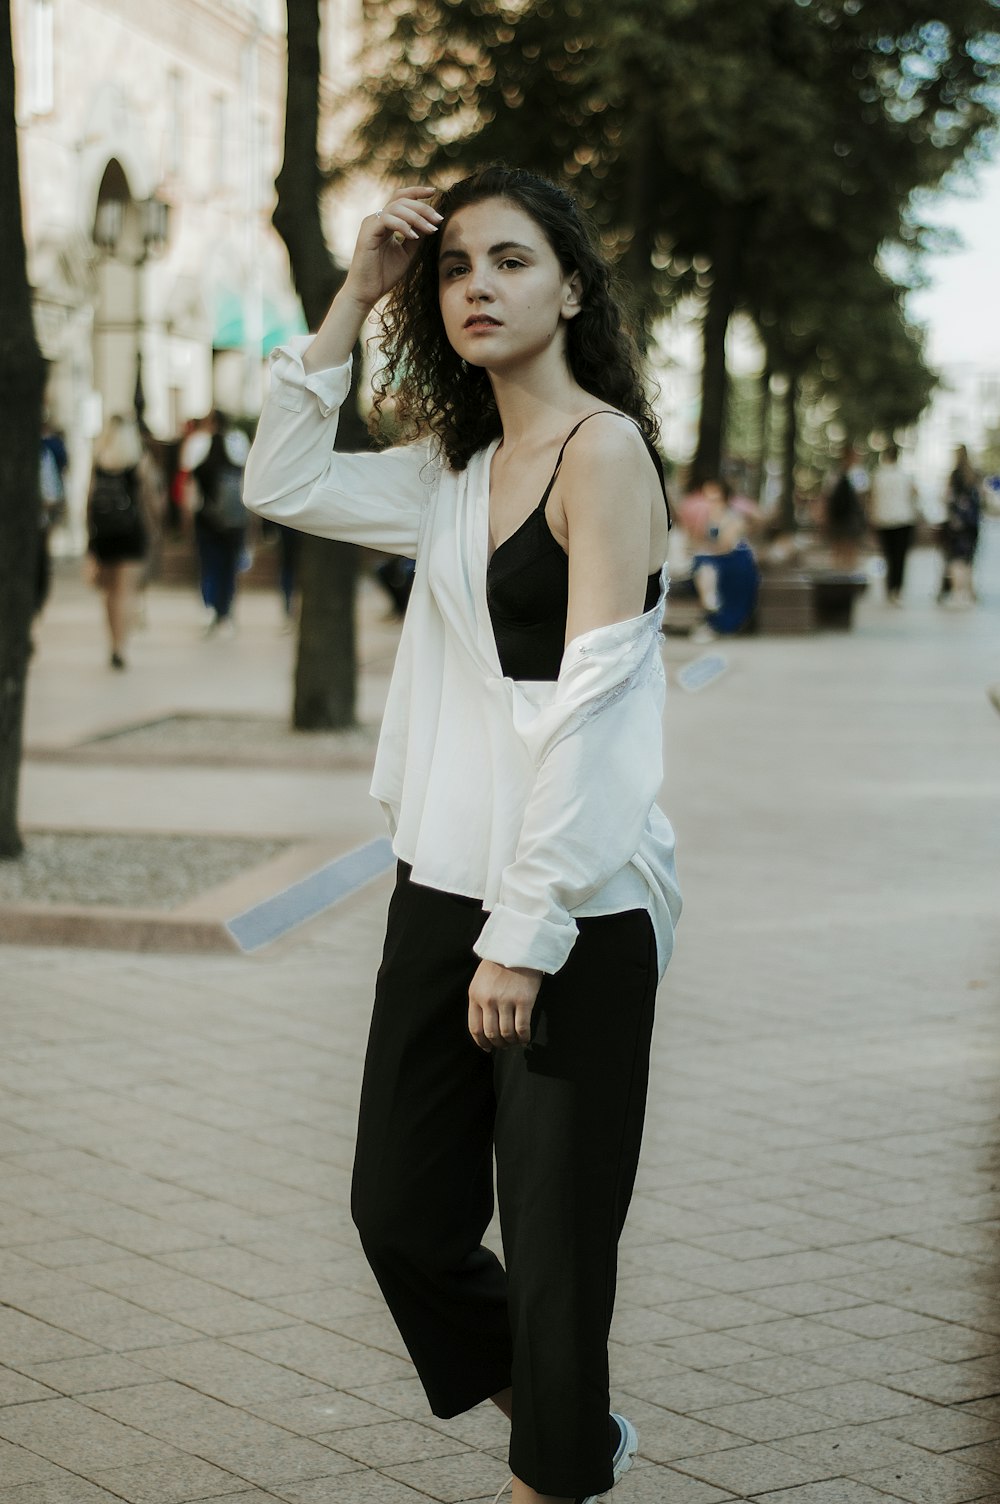 White Blouse Pictures Download Free Images On Unsplash